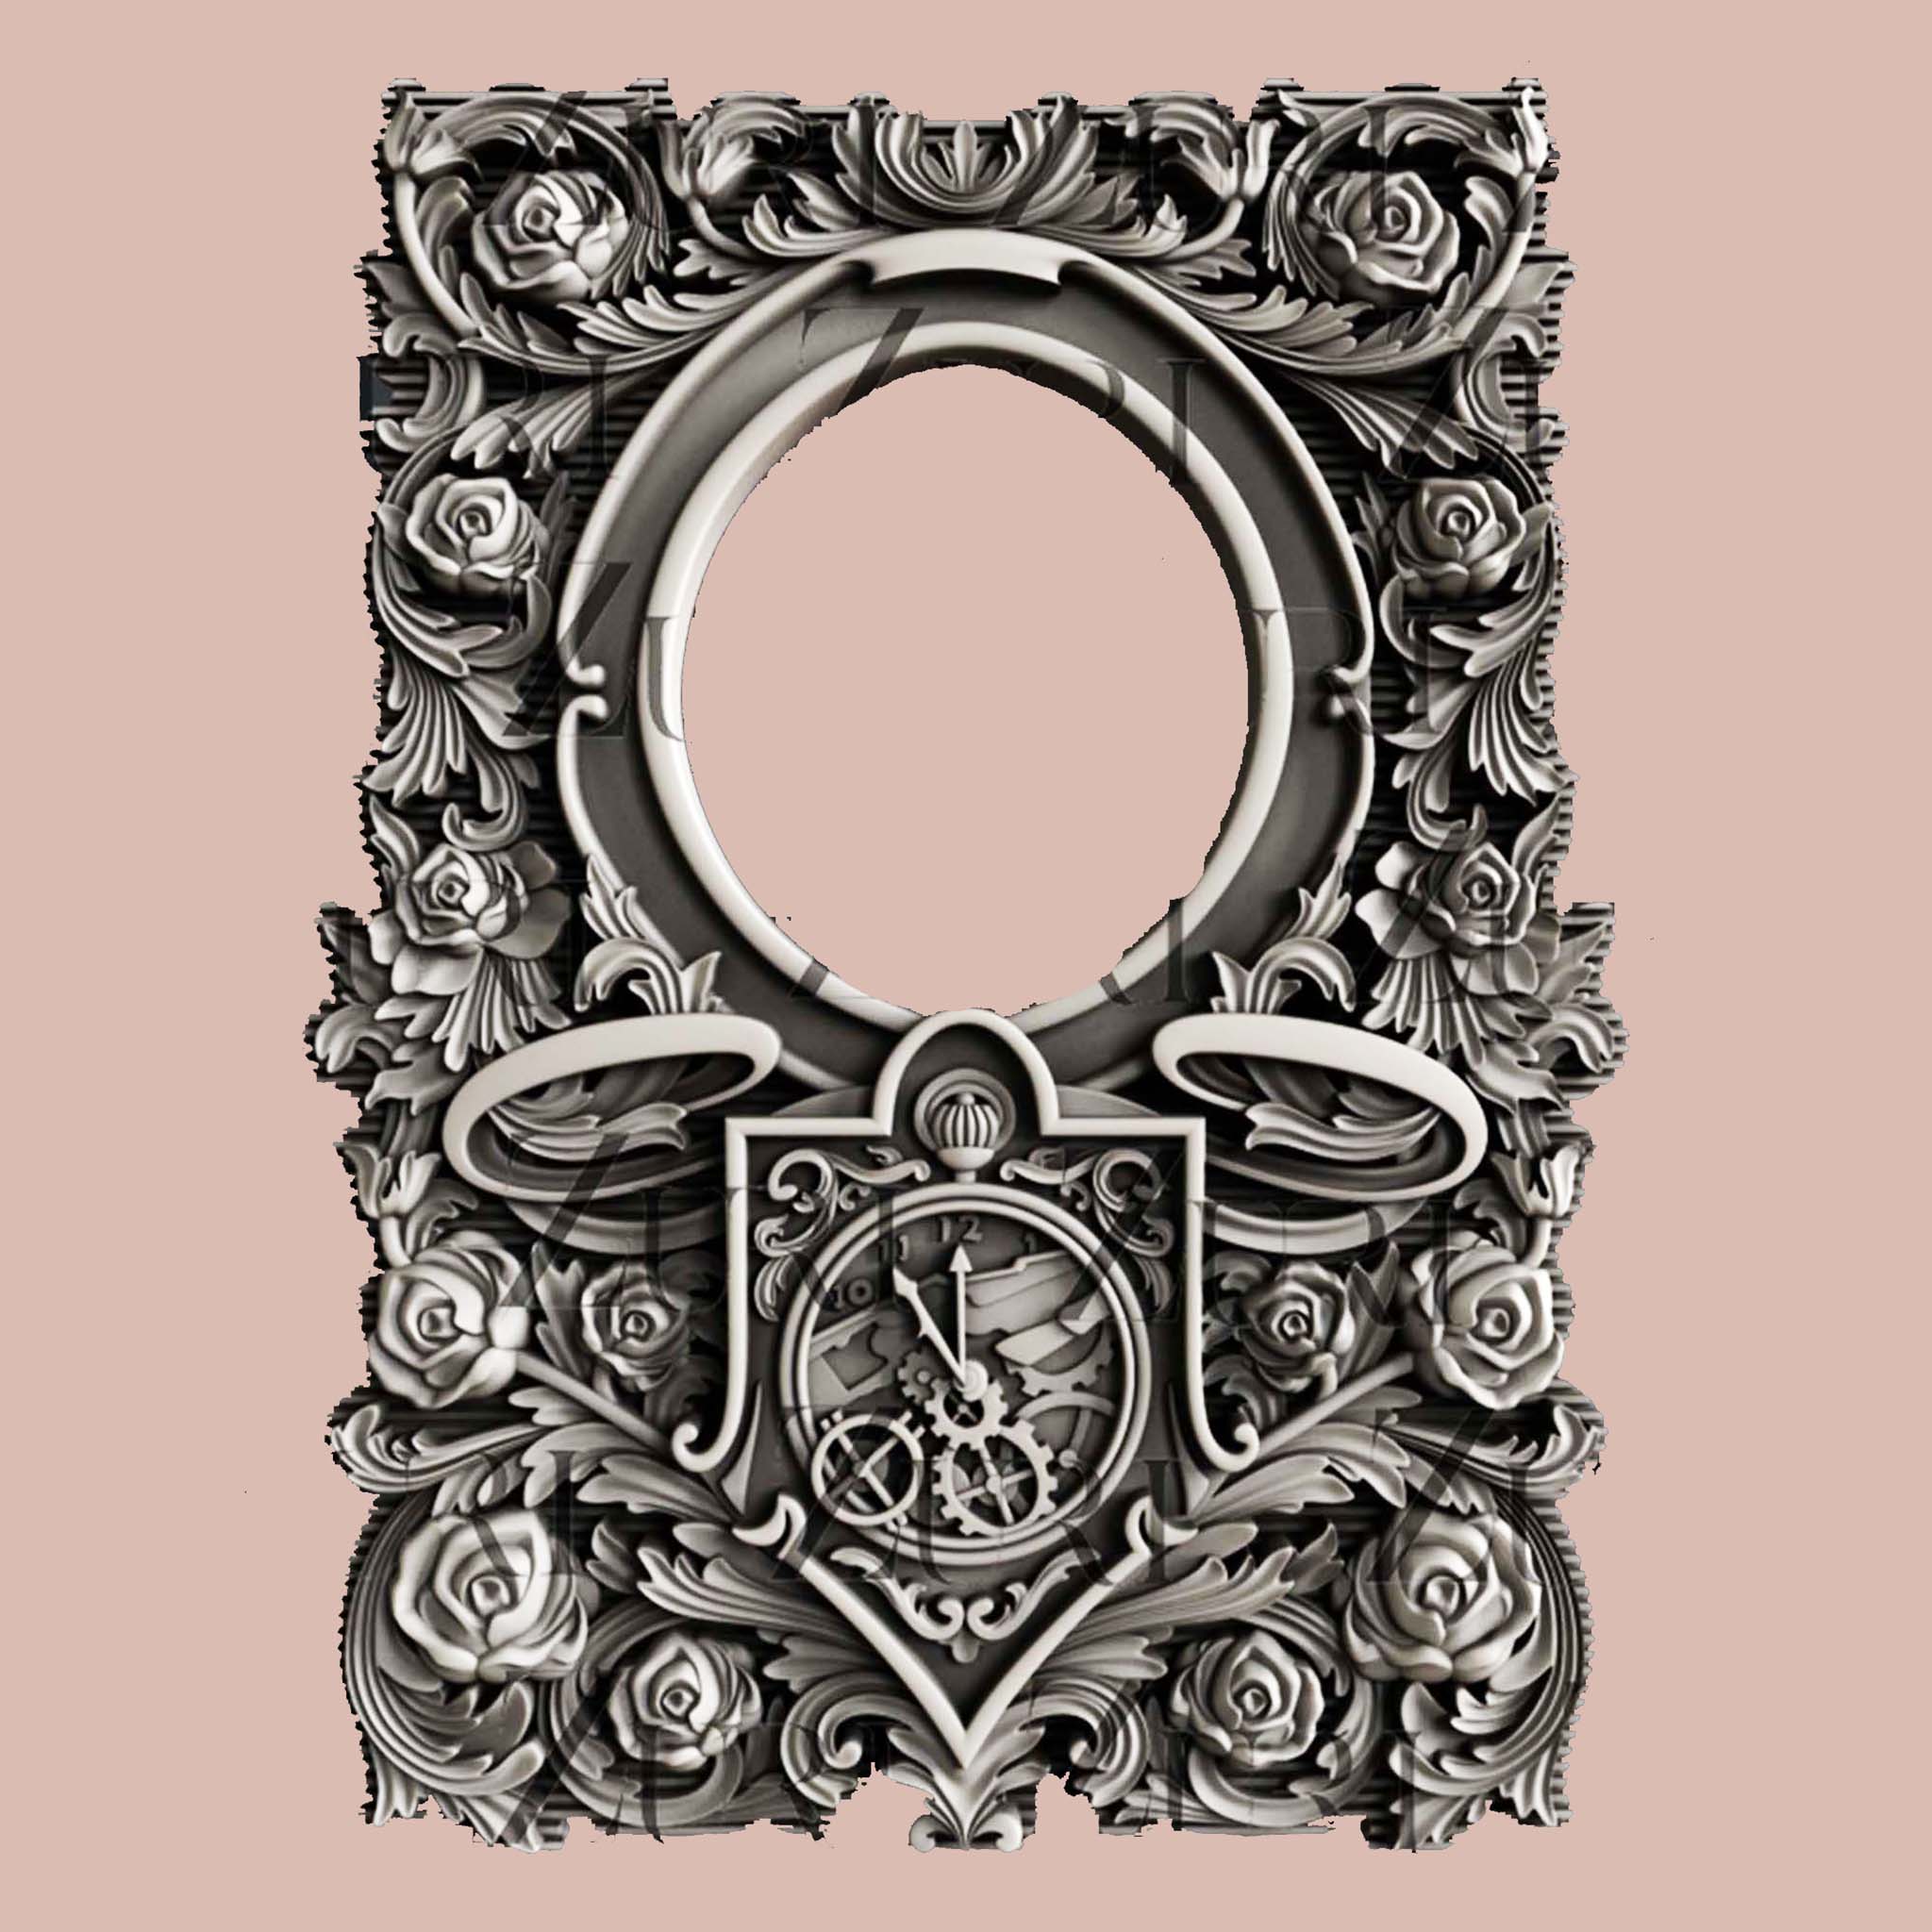 A grey silicone mold casting of an Alice in Wonderland inspired frame with roses and a pocket watch is on a light pink background.